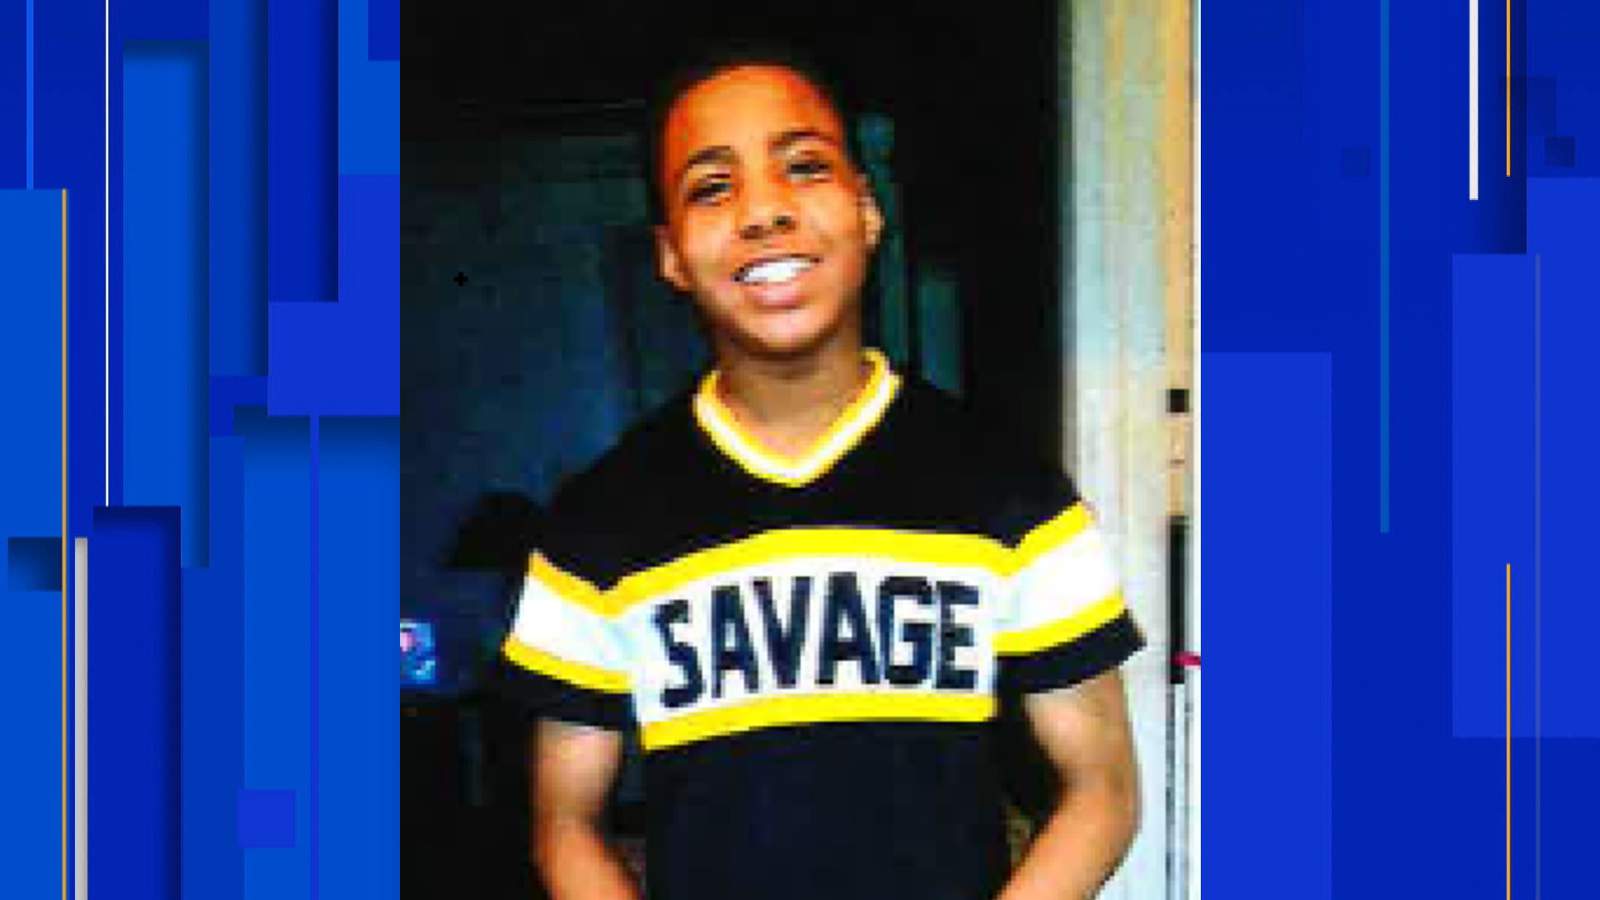 Detroit police want help finding 16-year-old boy missing since Dec. 27